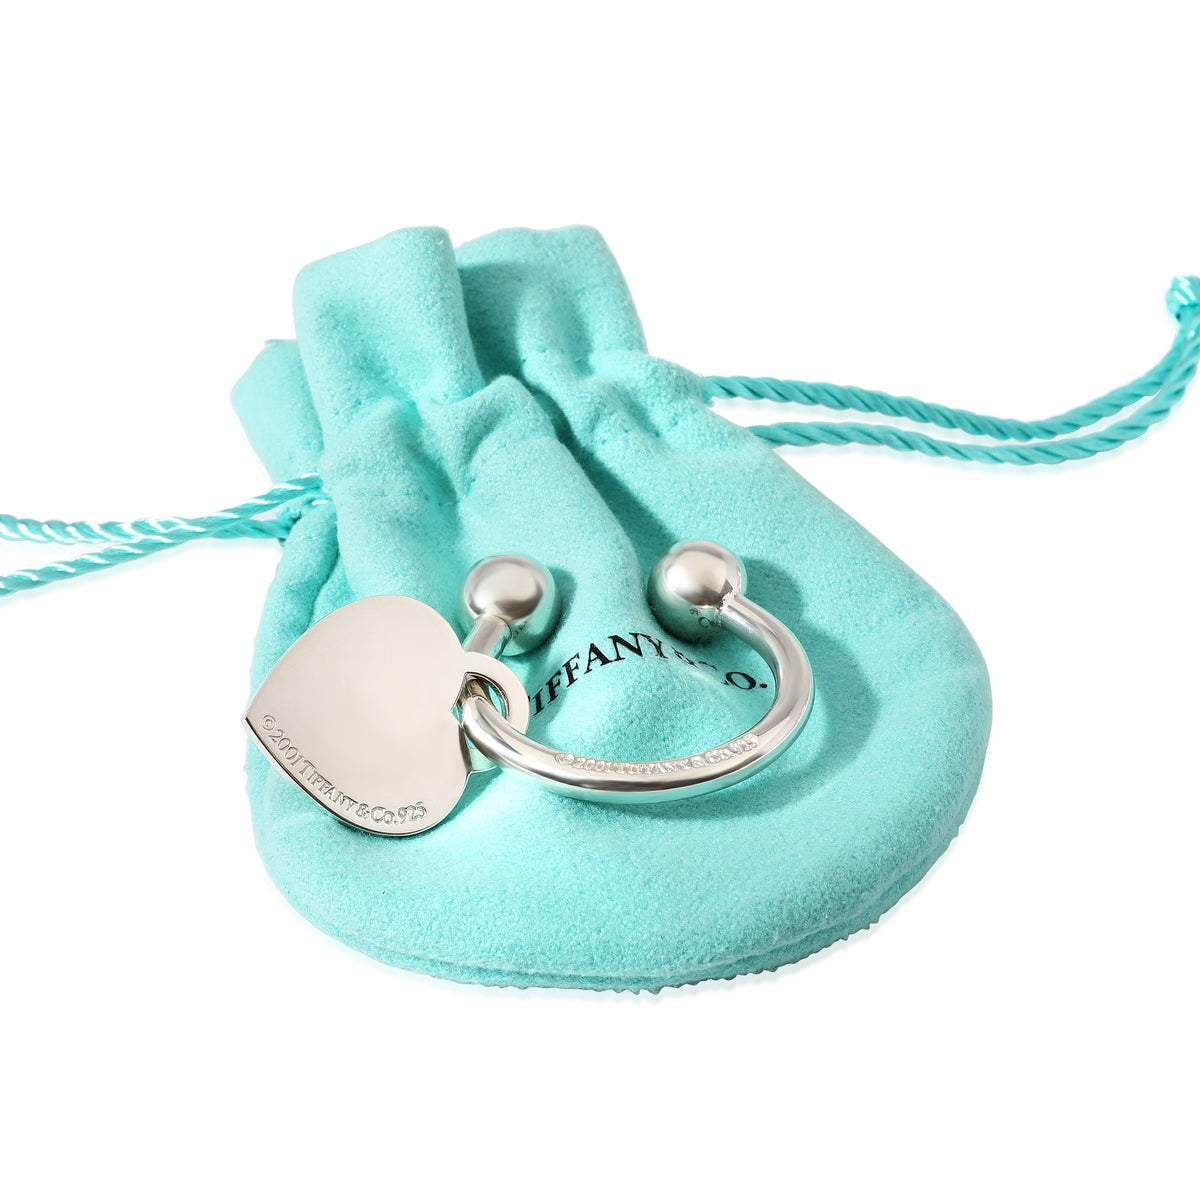 Tiffany & Co. Heart Tag Key Ring in Sterling Silver